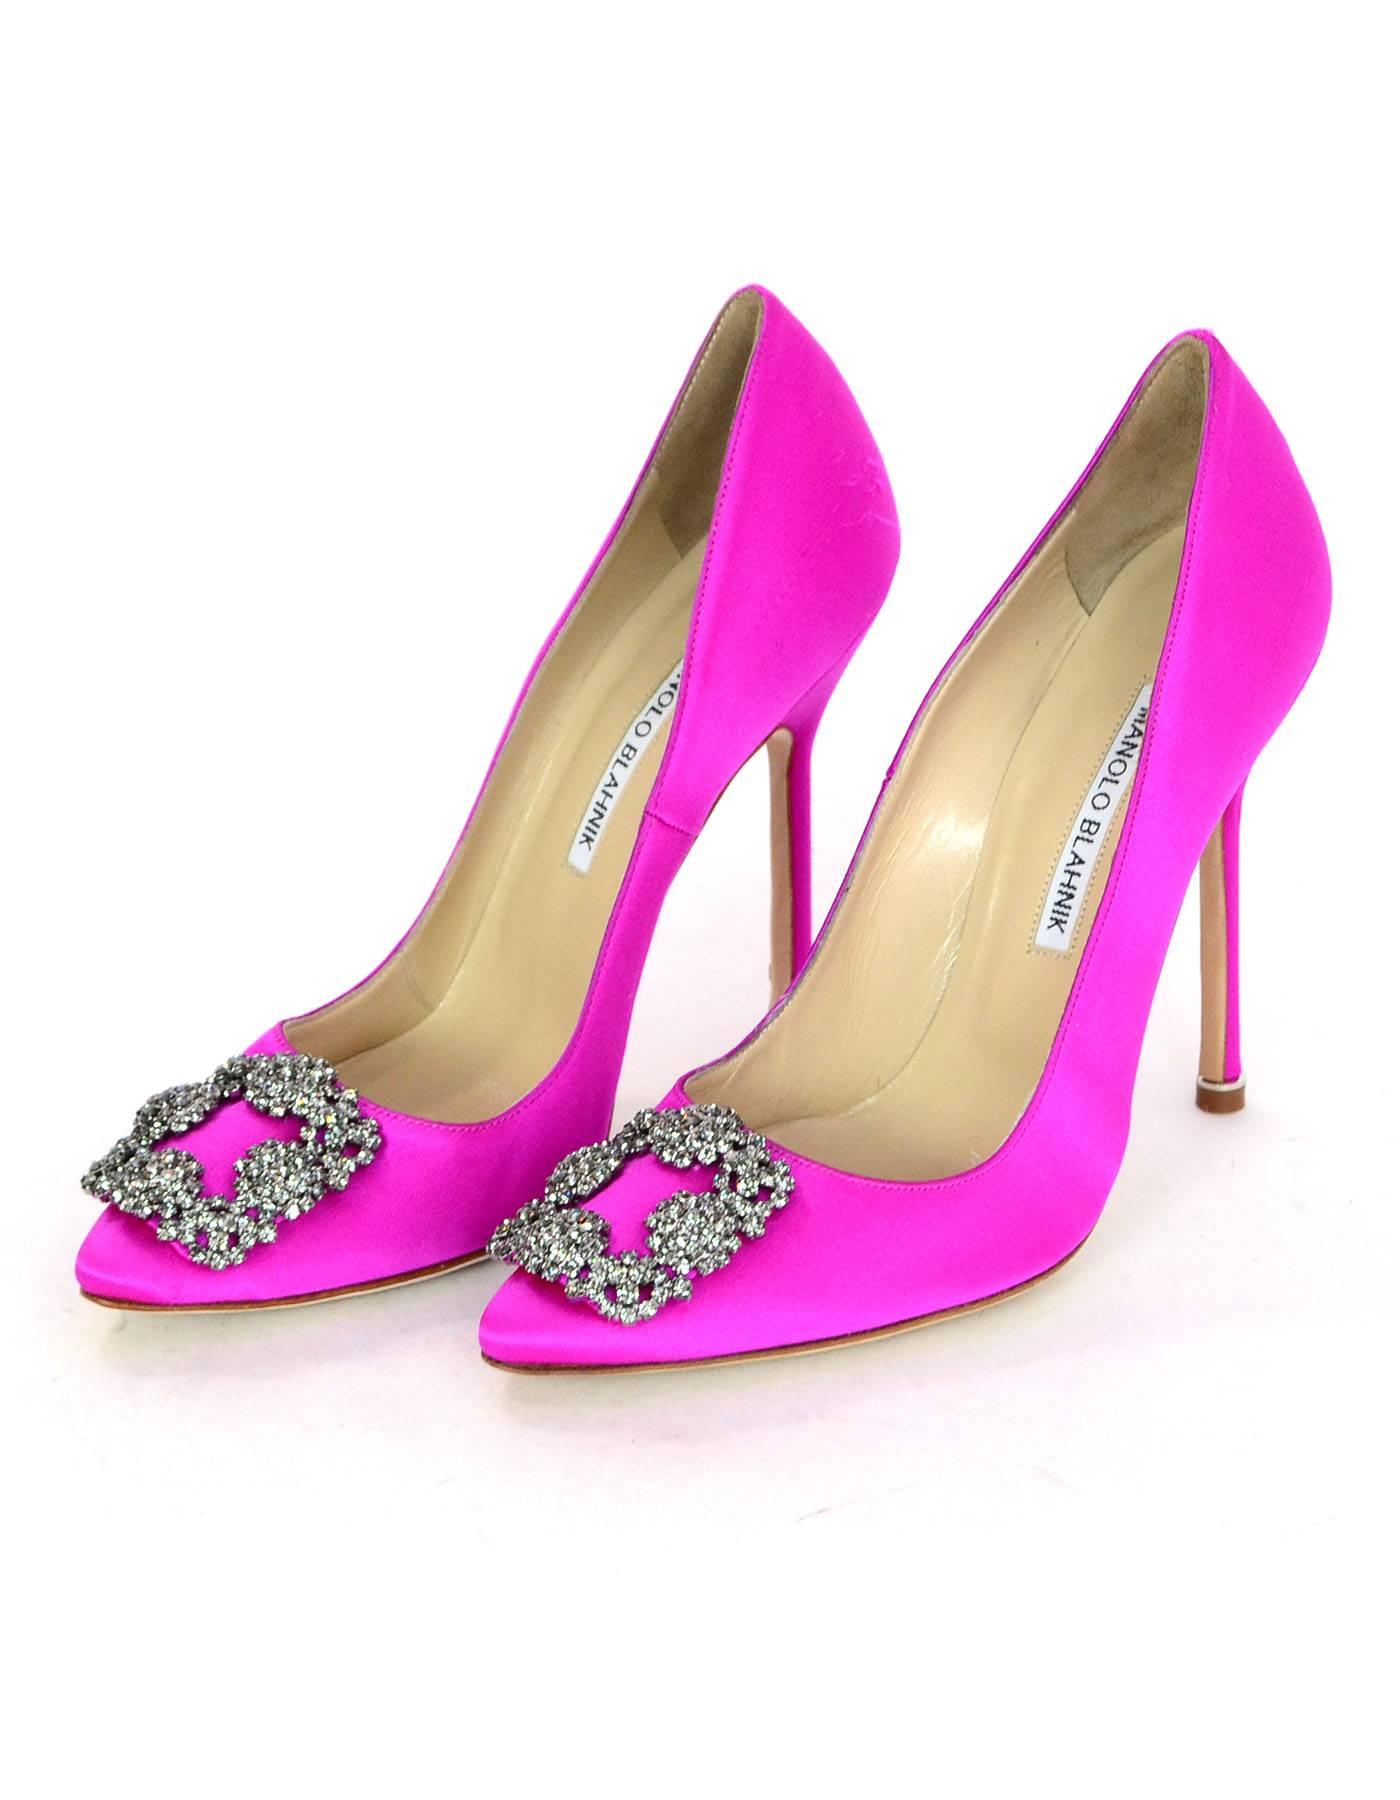 Manolo Blahnik Neon Pink Satin Hangisi 115mm Pumps Sz 38

Made In: Italy
Color: Neon pink
Materials: Satin, crystal
Closure/Opening: Slide on
Sole Stamp: Manolo Blahnik Made in Italy 38
Retail Price: $995 + tax
Overall Condition: Excellent pre-owned